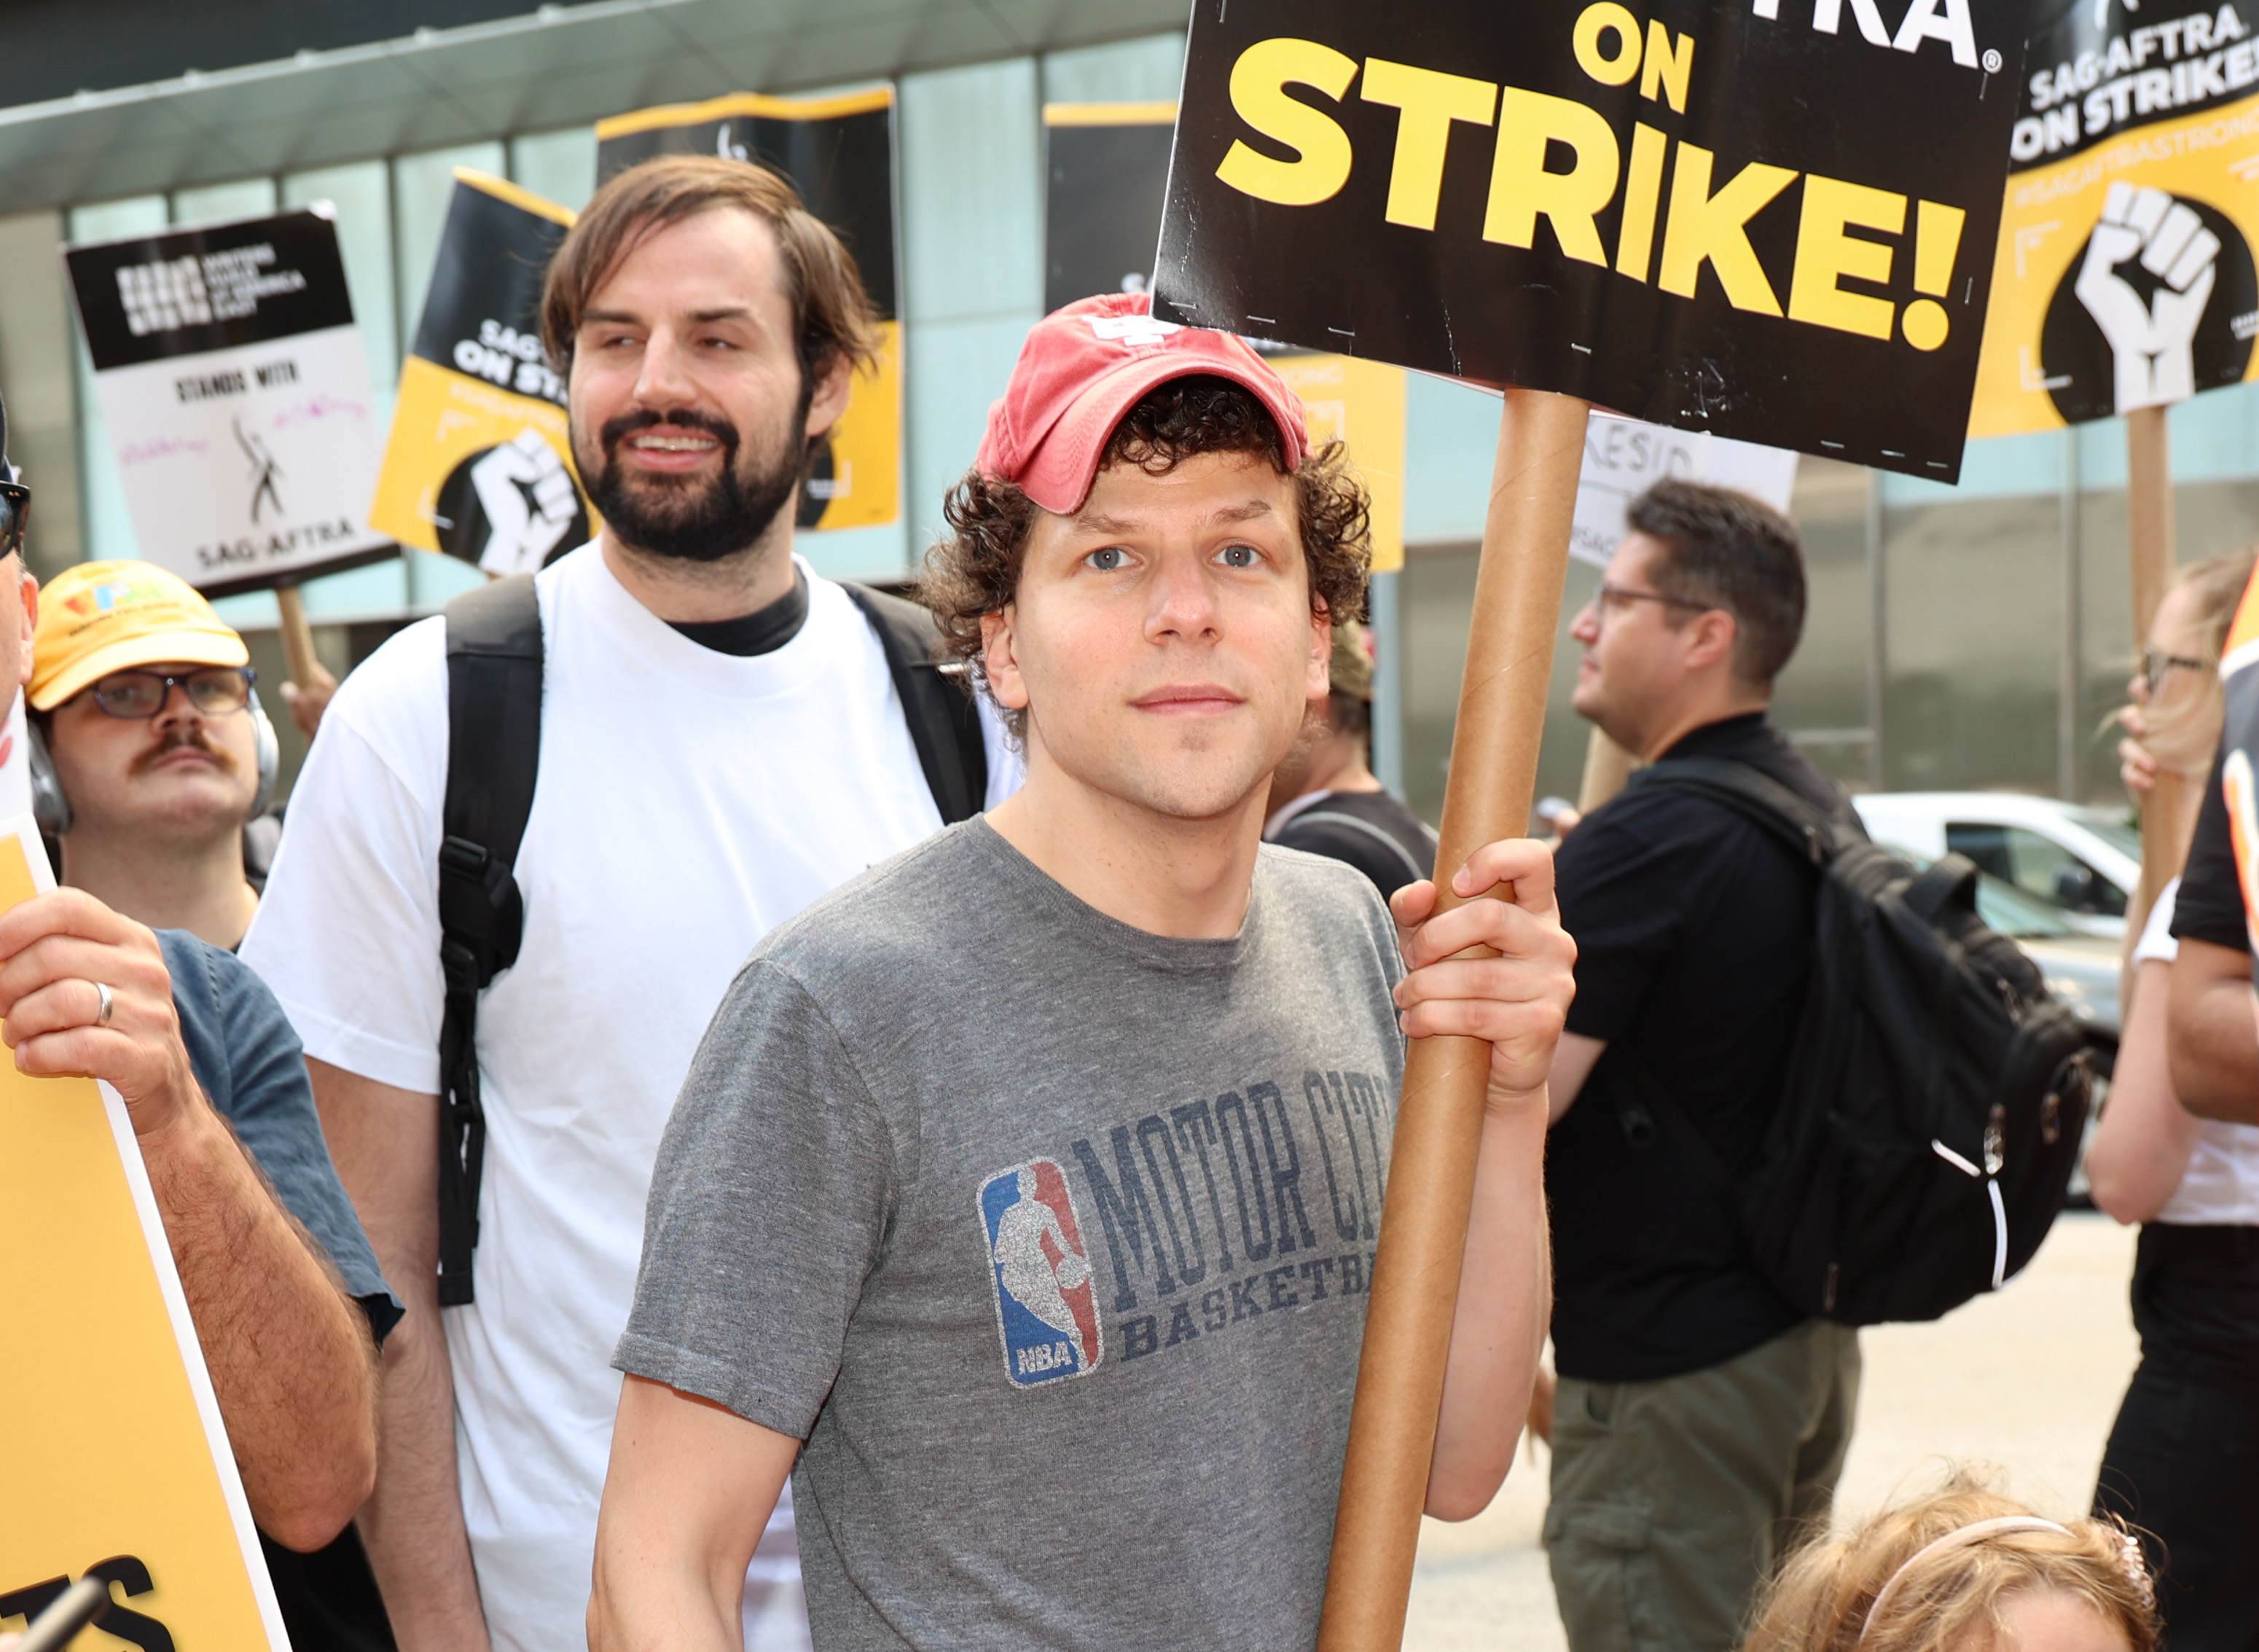 Holding an &quot;On Strike&quot; sign and wearing an NBA T-shirt